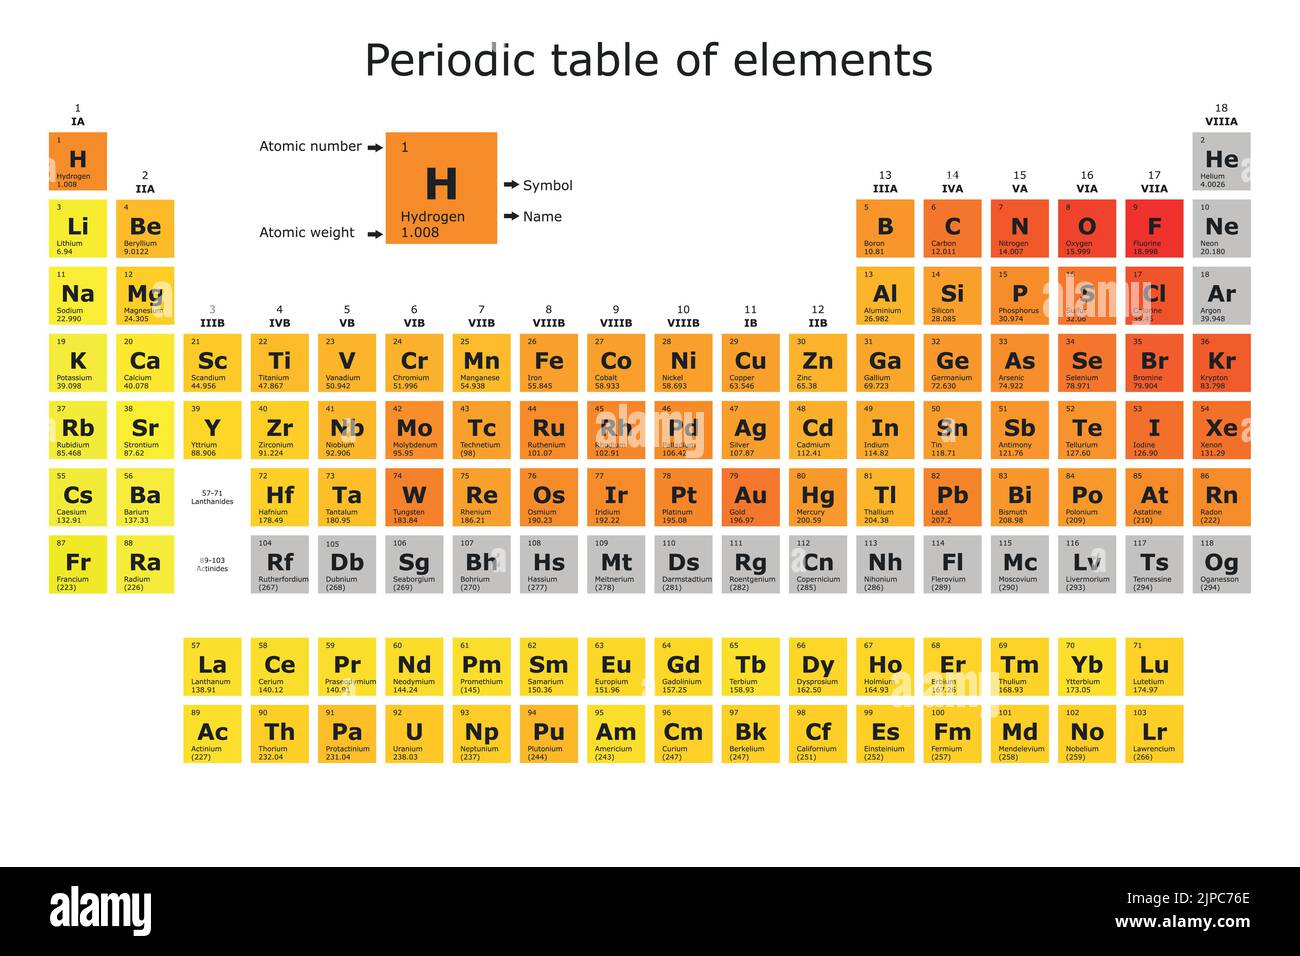 Chemical elements with Atomic number and symbols. Lit element